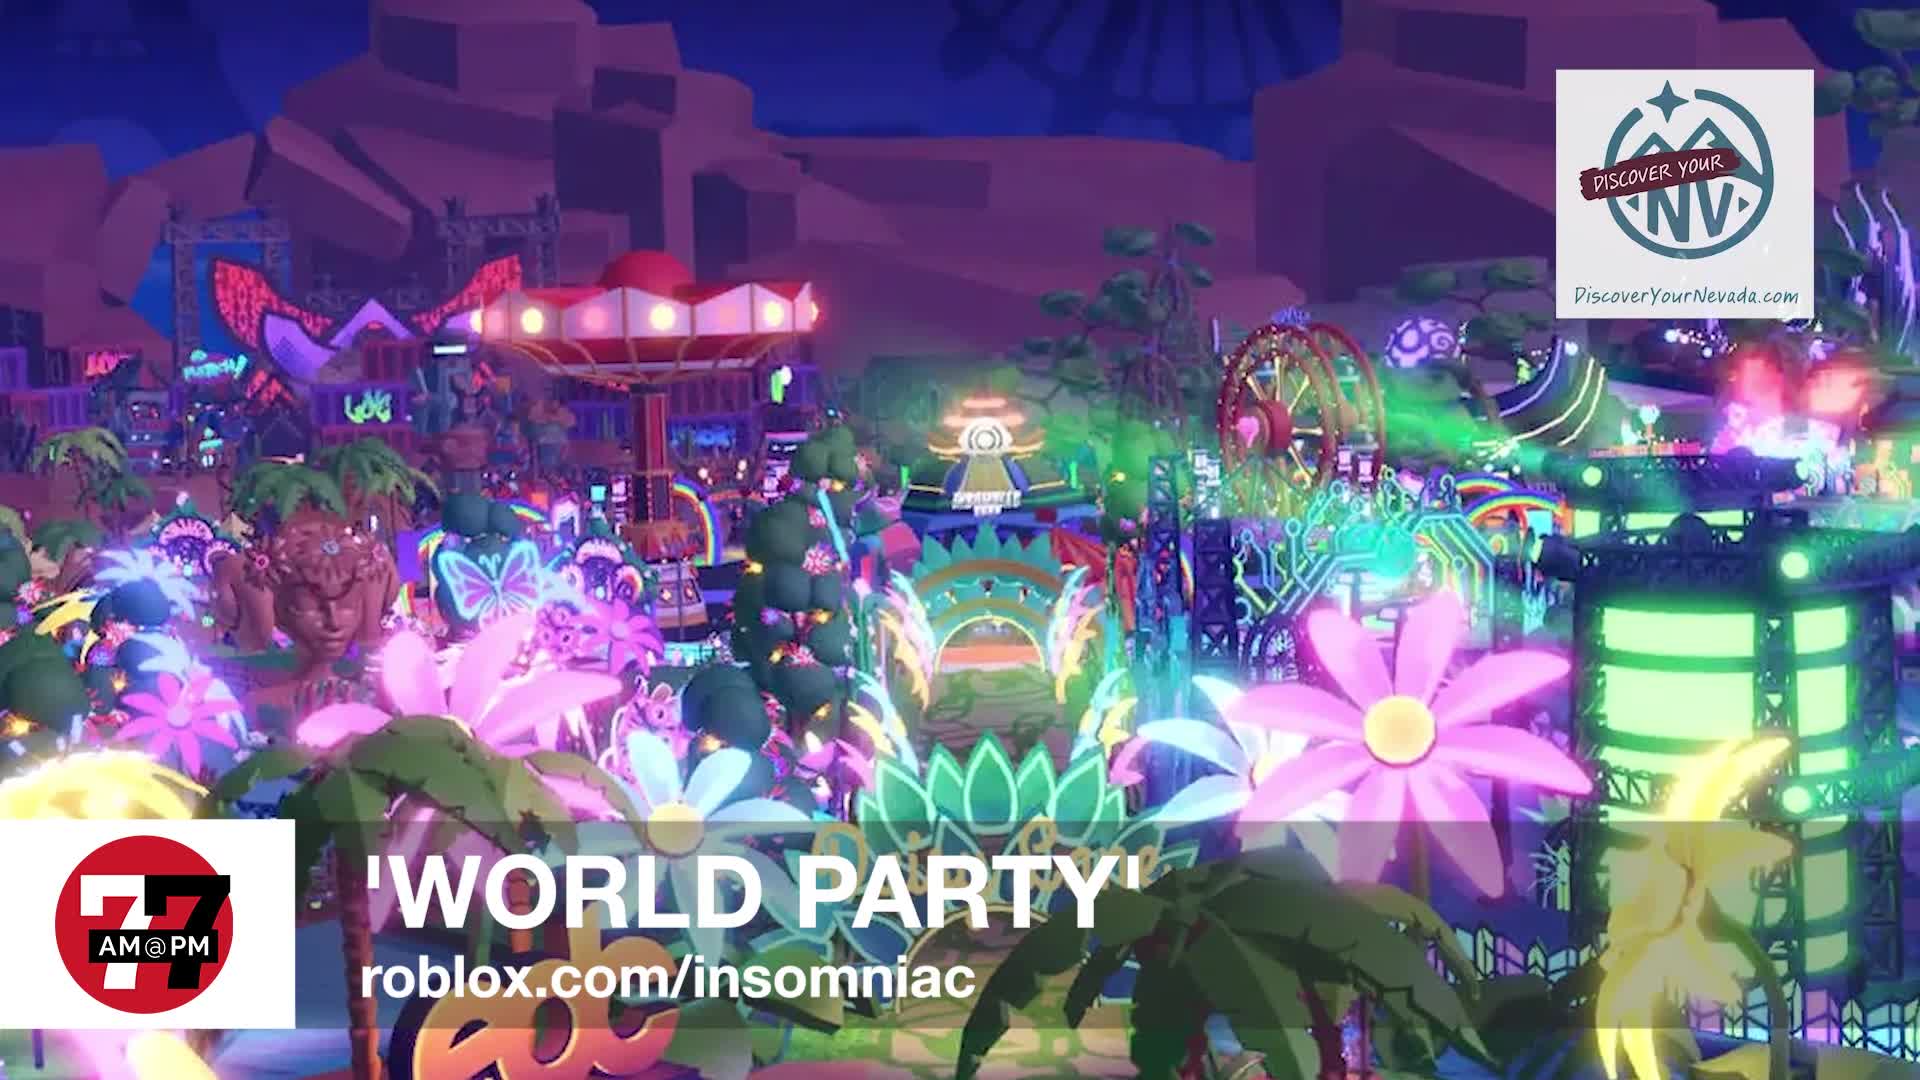 Enjoy EDC from Home with Roblox